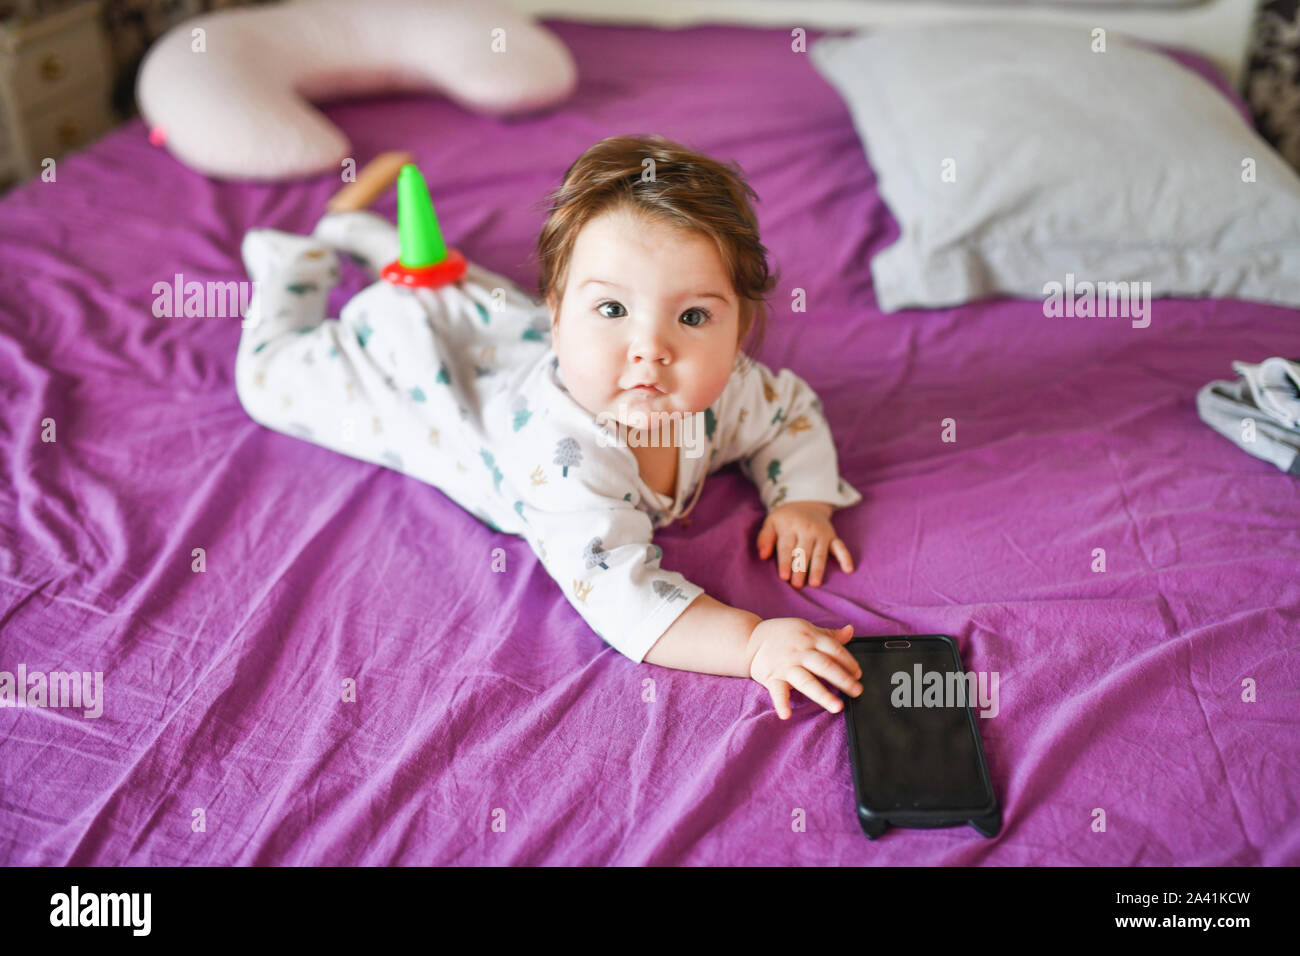 little boy holds a phone. Cute little baby holds mobile phone in his hands and looking attentively at screen. Child and gadget, parent control concept Stock Photo